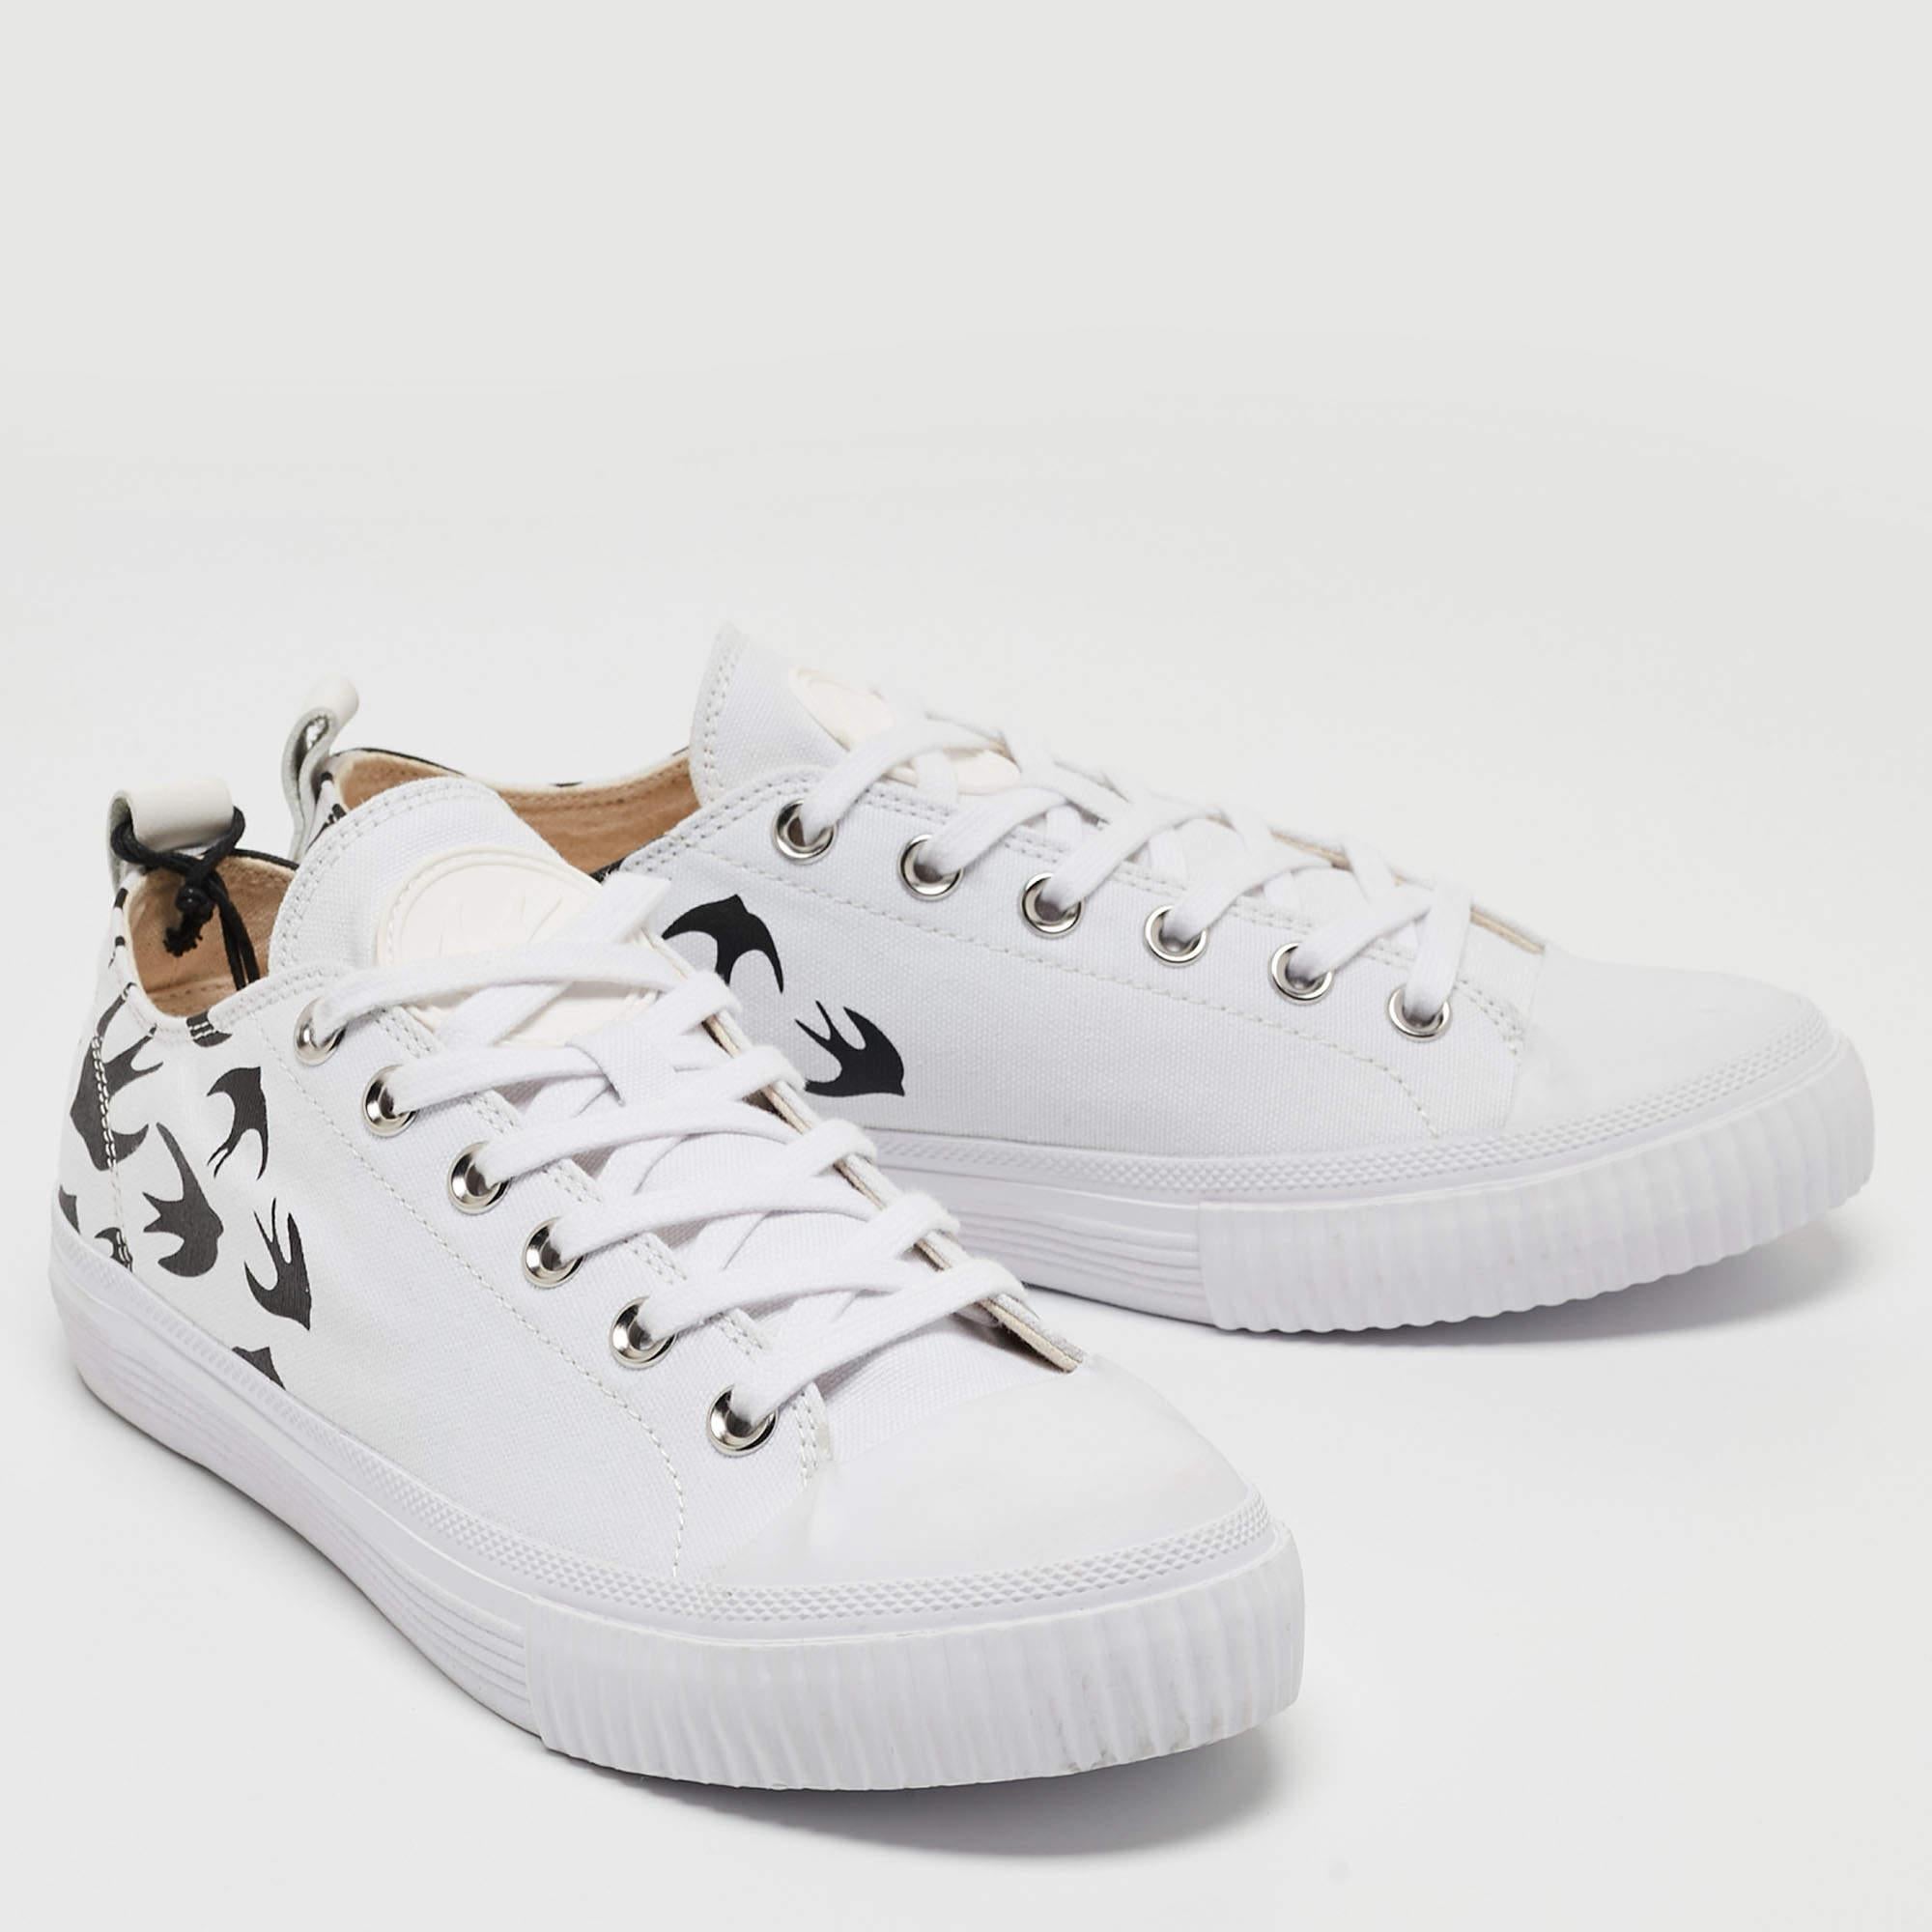 Step into fashion-forward luxury with these designer sneakers. These premium kicks offer a harmonious blend of style and comfort, perfect for those who demand sophistication in every step.

